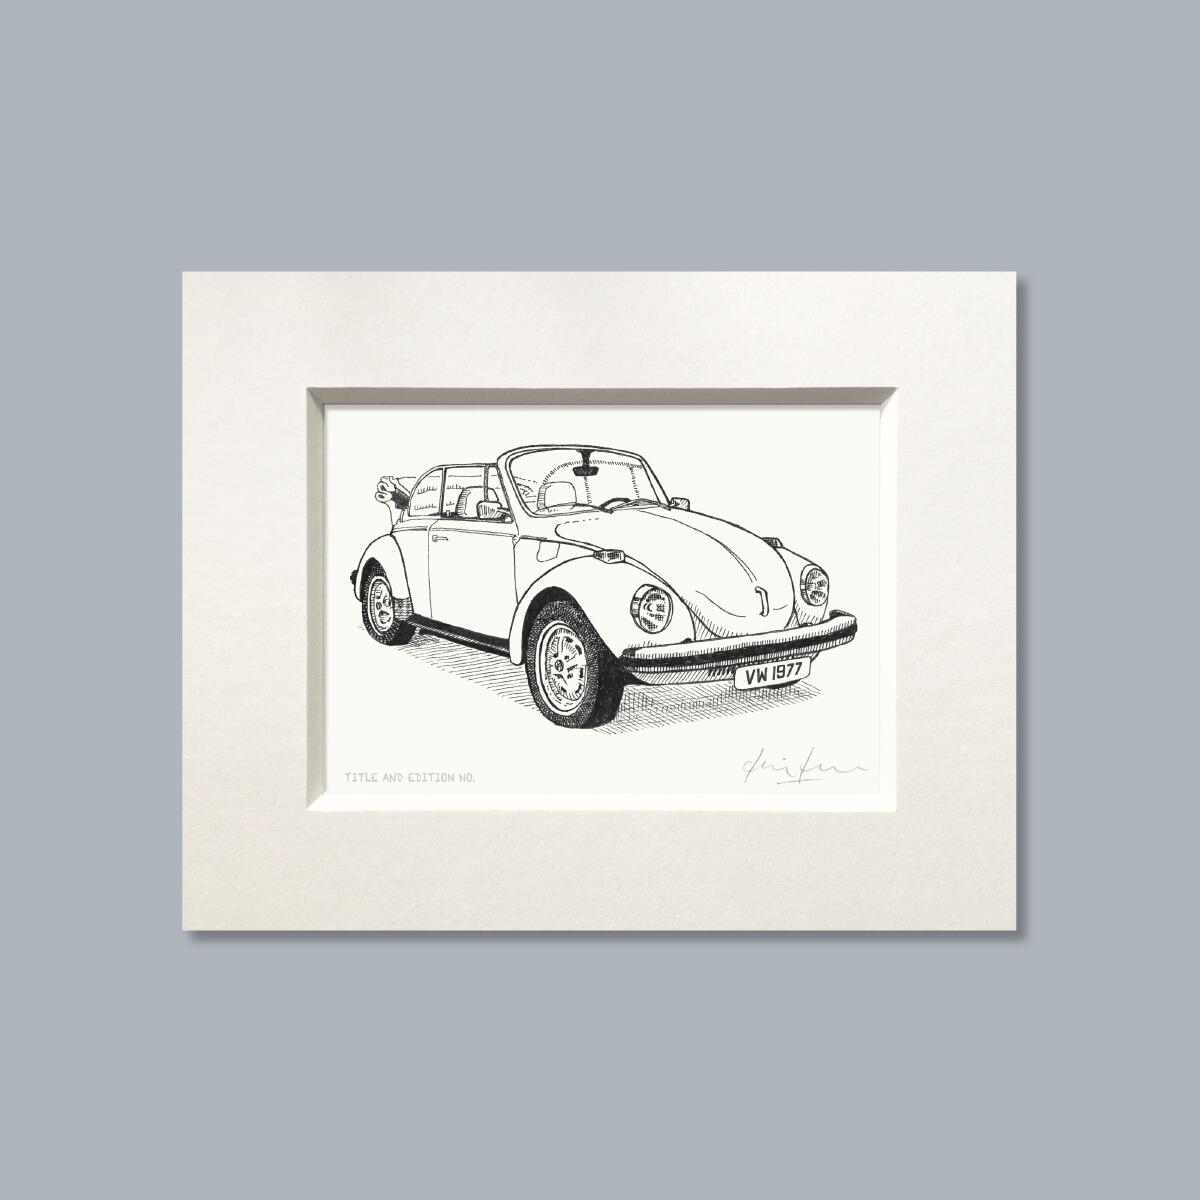 Limited edition print from pen and ink drawing of a 1977 soft-top VW Beetle in white mount